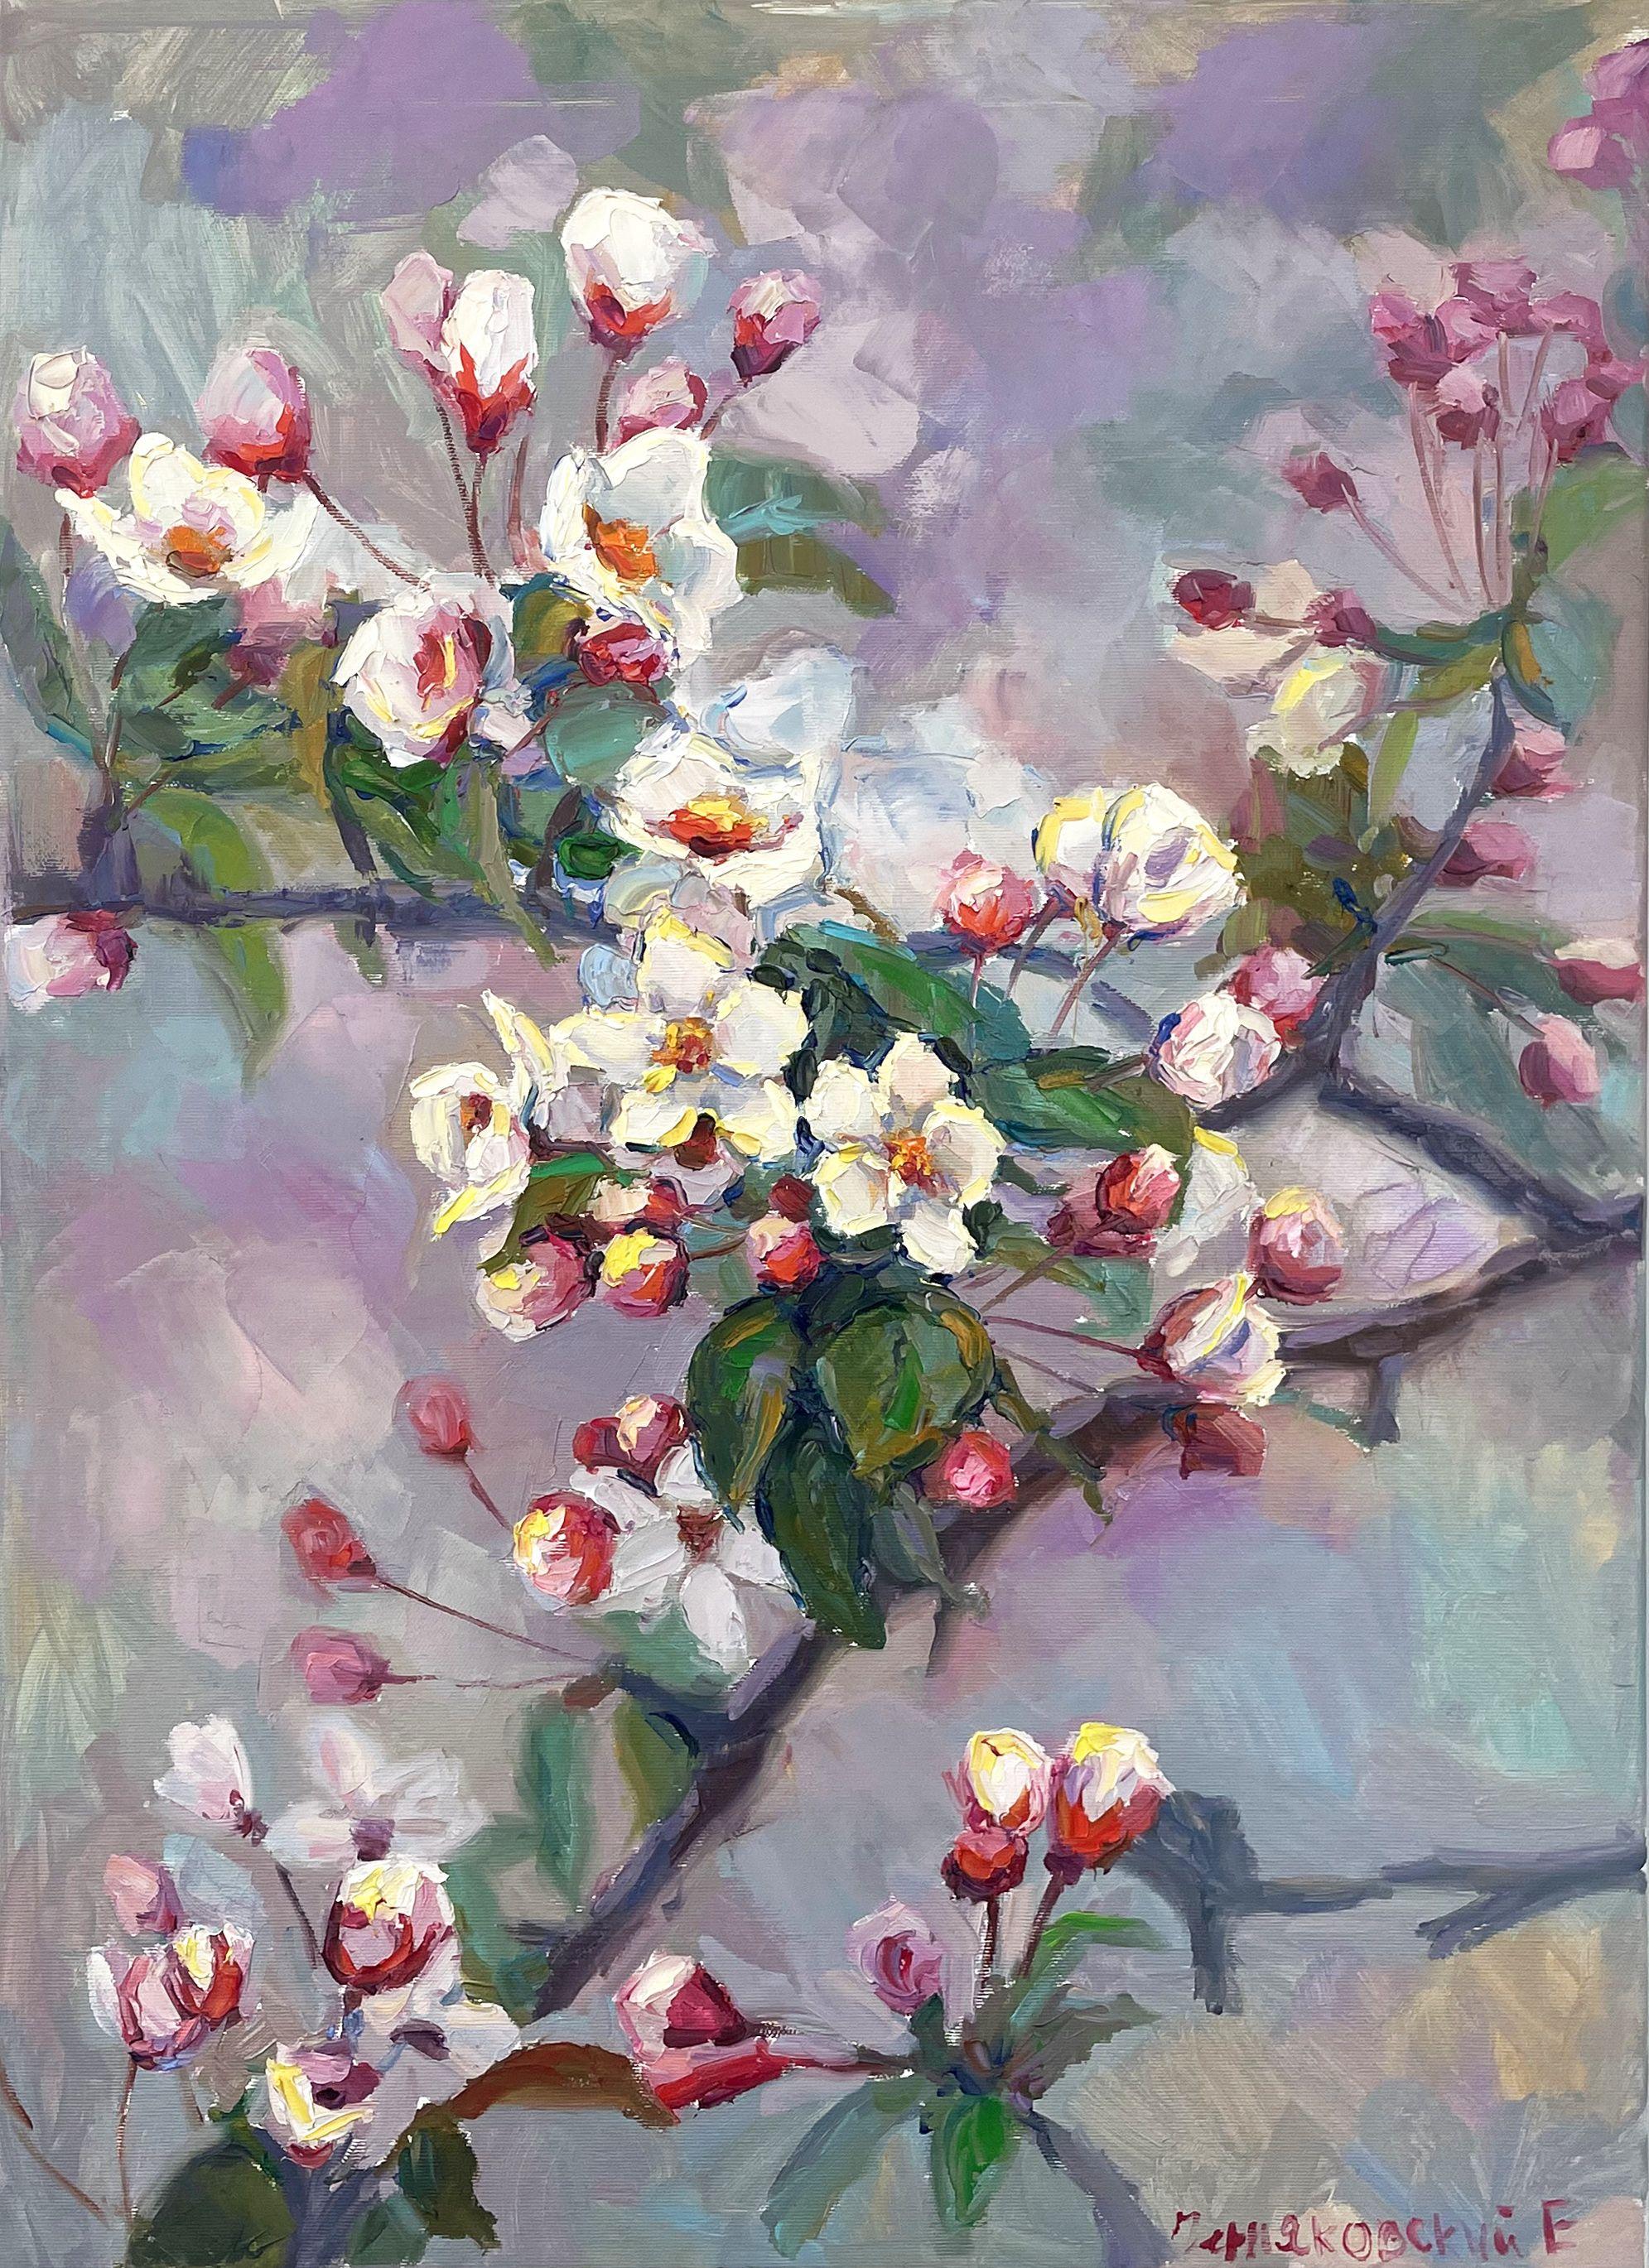 Original Oil painting by Ukrainian artist Evgeny Chernyakovsky    "flowering tree"  50.0 X 70.0 CM / 19.6 X 27.5 IN  HIGH QUALITY oil on canvas  Signed on the front and back  Dated 2023  Good condition  GUARANTEE OF AUTHENTICITY   :: Painting ::